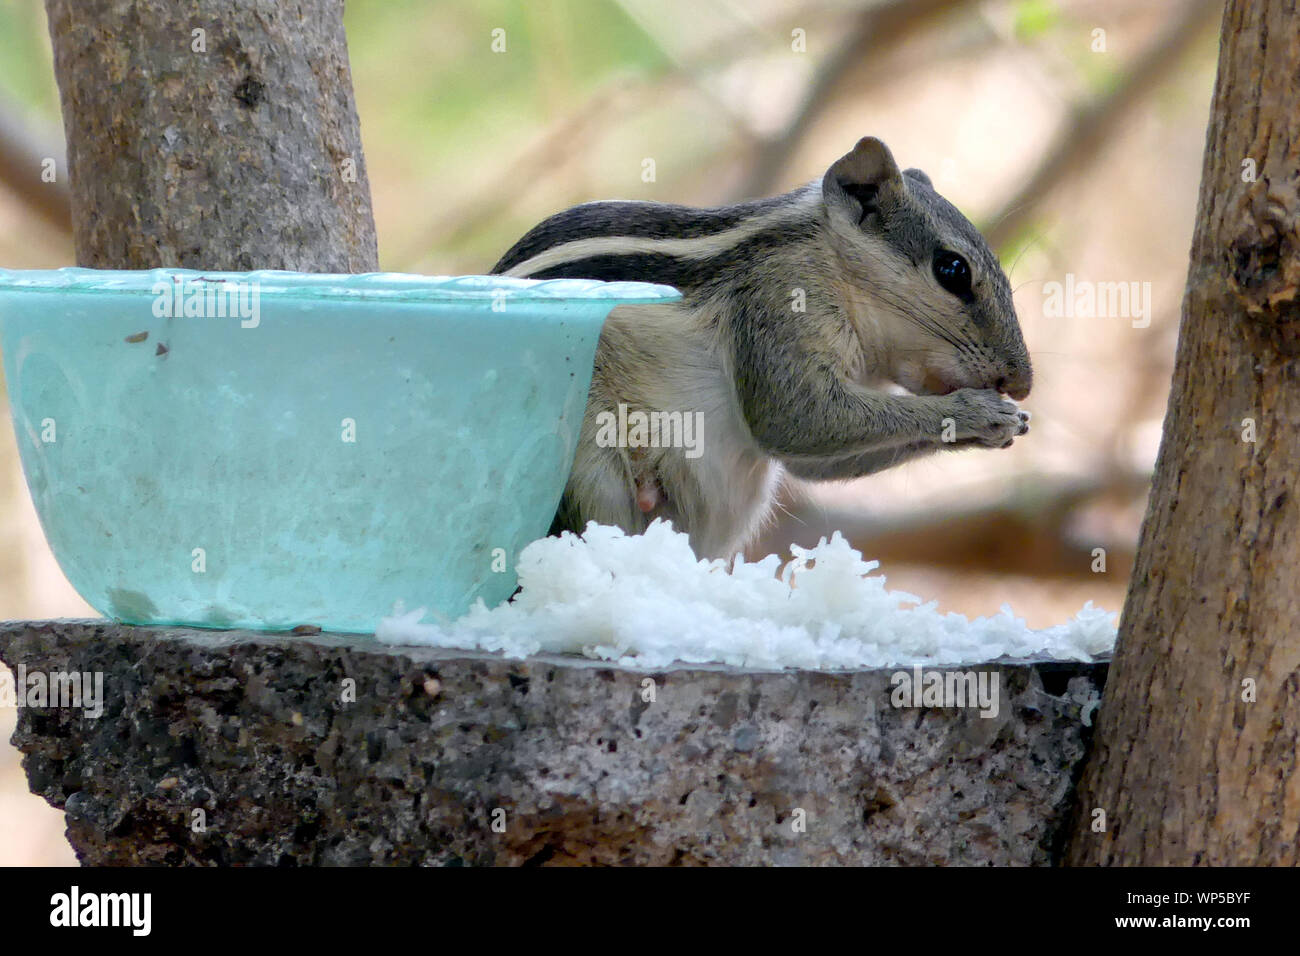 During extreme summer in India food and water provided to squirrels. During this period so many squirrels die for scarcity of water. Stock Photo